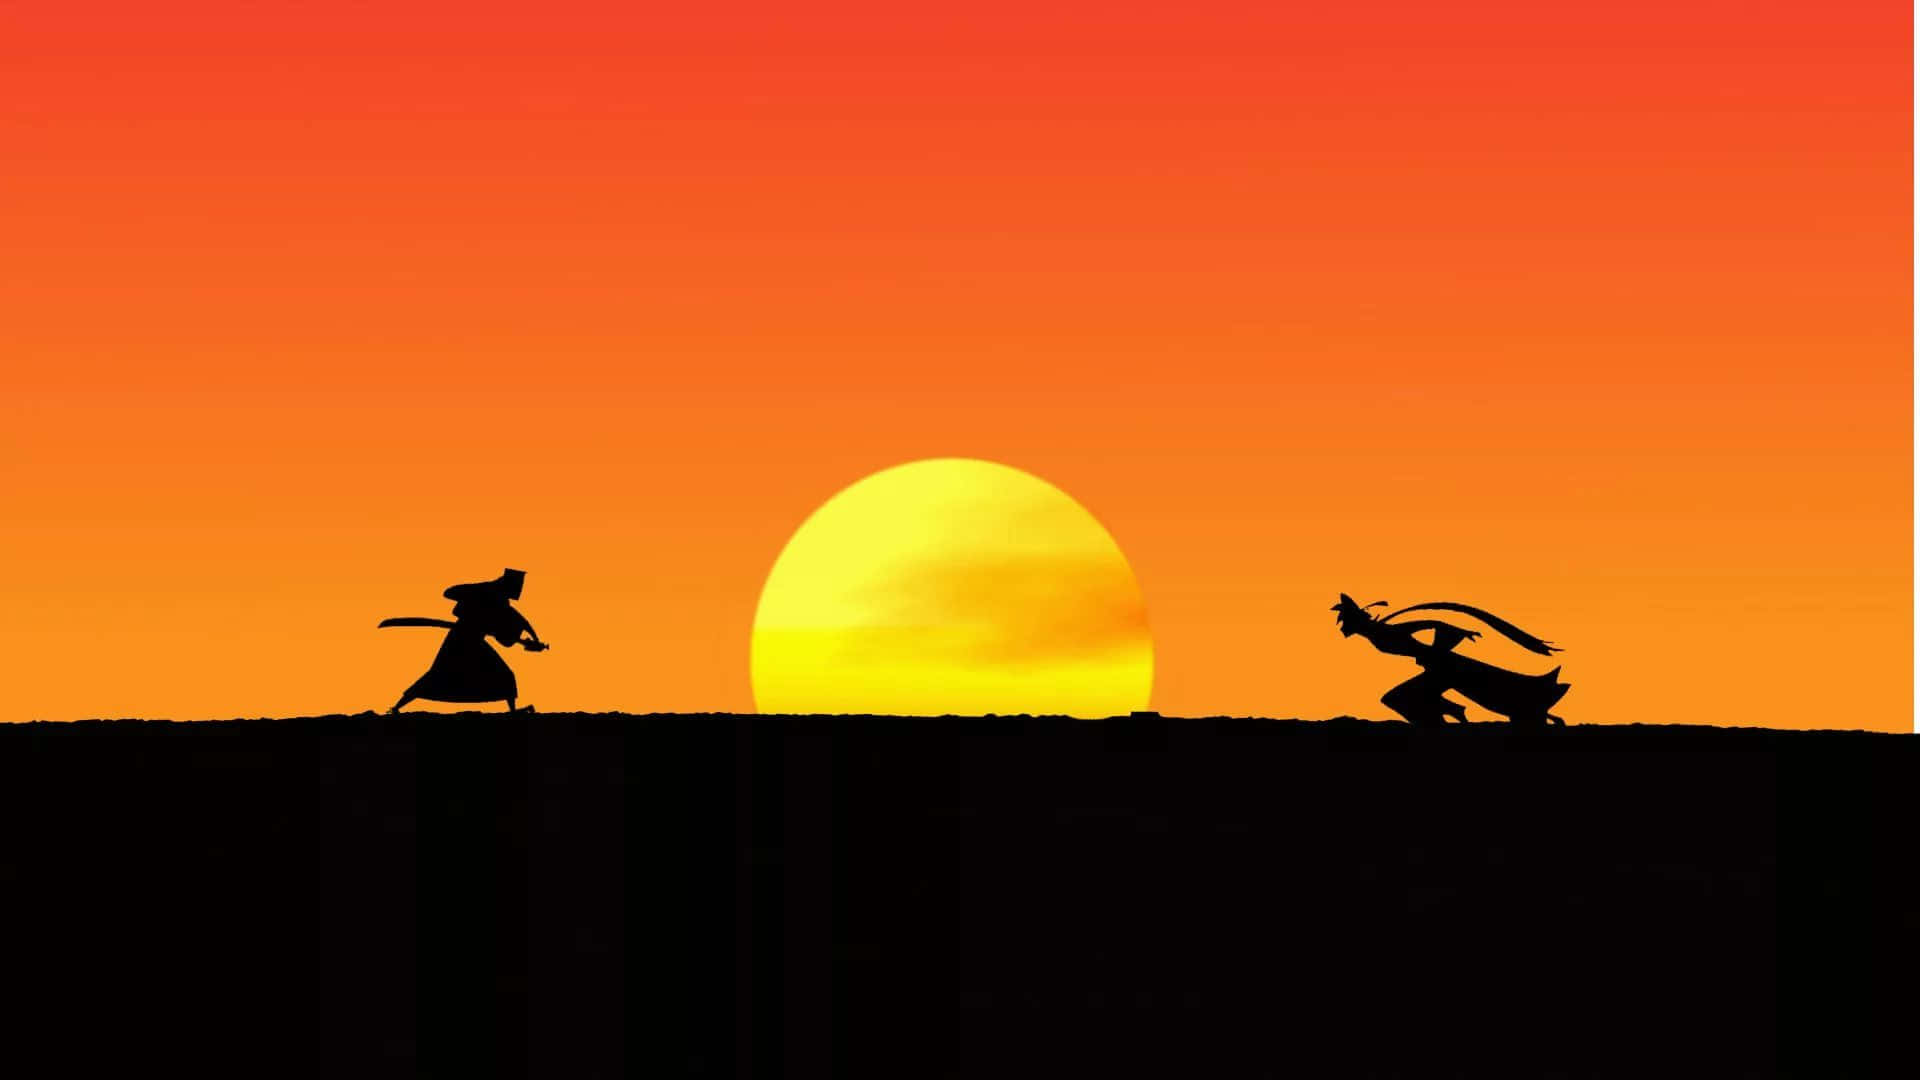 Samurai Jack striking a fierce pose in vibrant, action-packed settings.